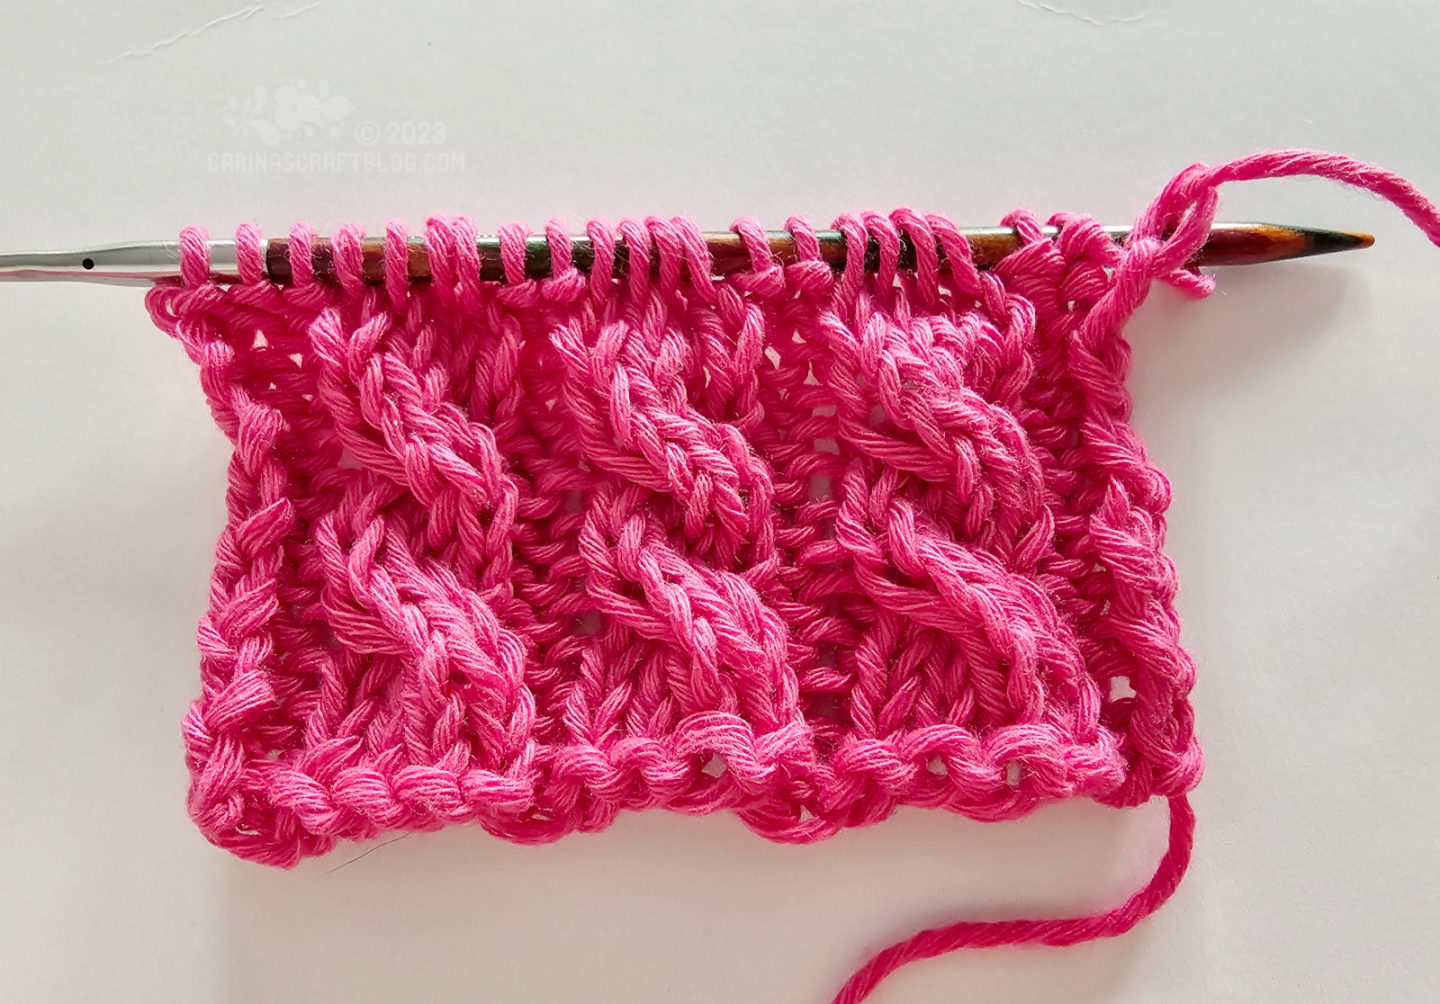 Overhead view of a short piece of knitting with a cabled pattern  using hot pink year.